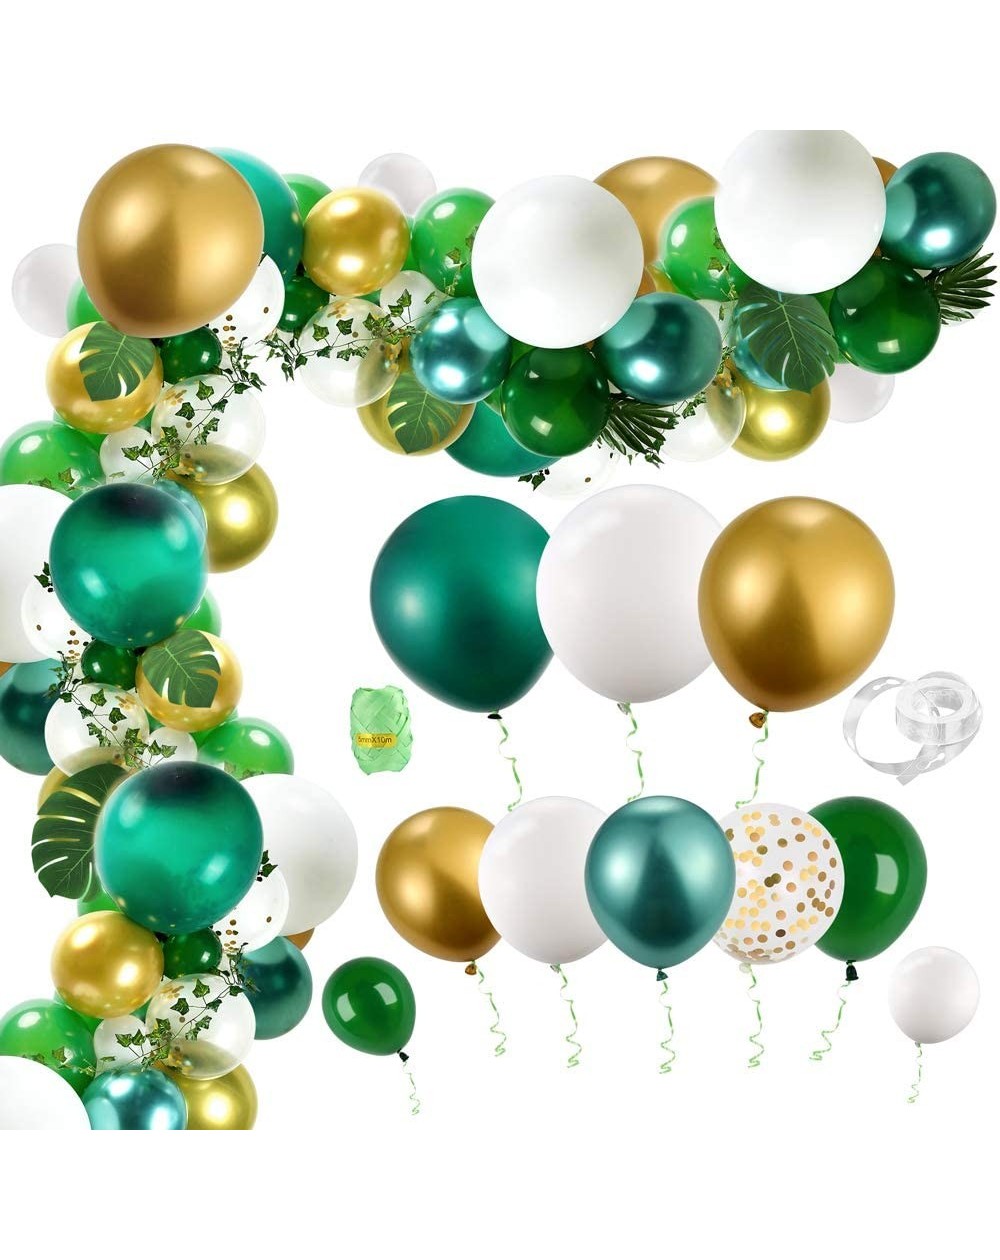 Balloons 123 Pieces Jungle Safari Balloons Garland Arch Kit with Palm Leaves- Ivy Vines and Balloon Strip for Baby Shower Bir...